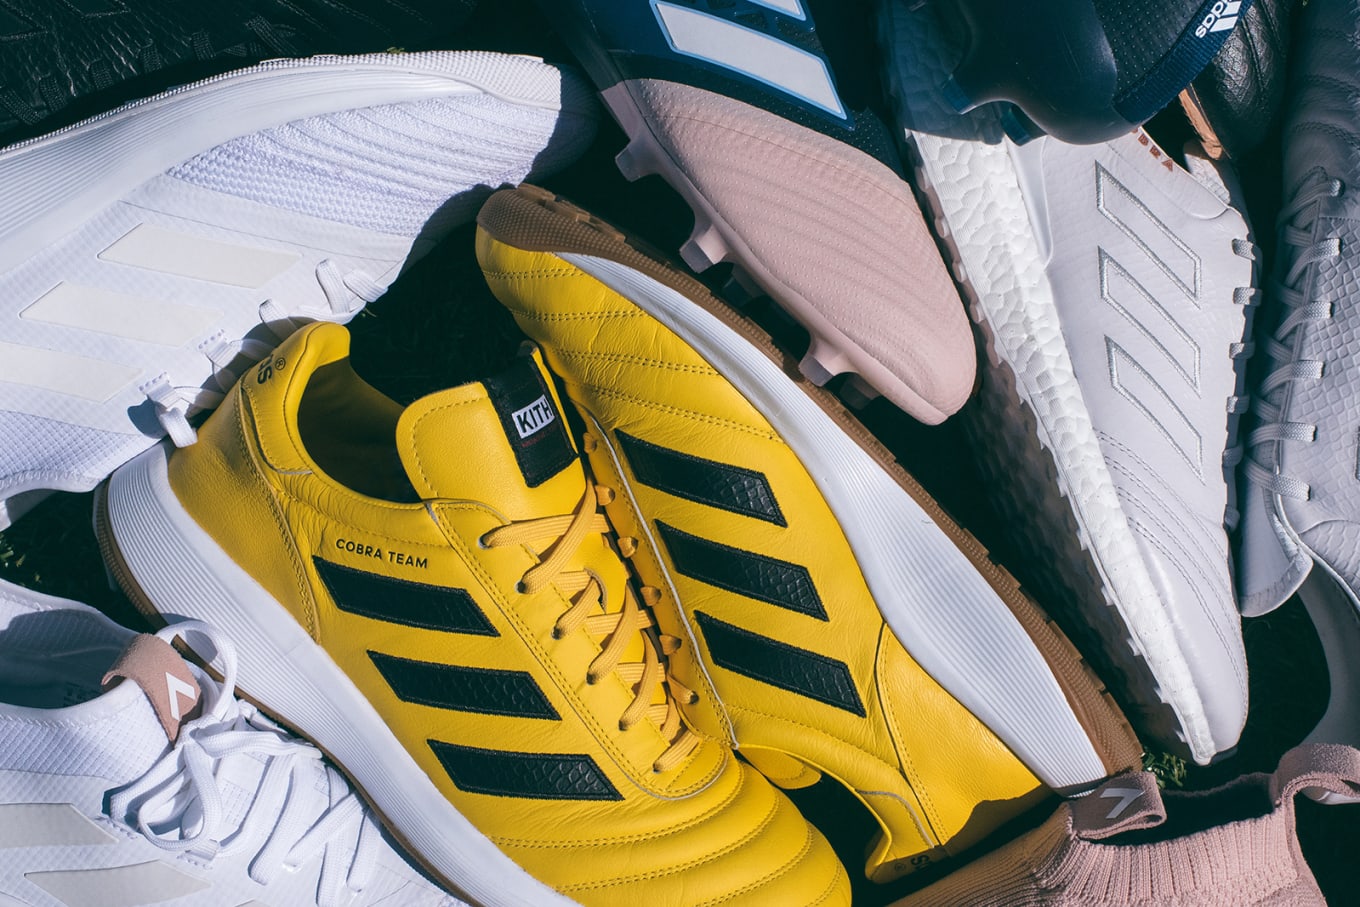 Ronnie Adidas Soccer Shoes | Sole Collector